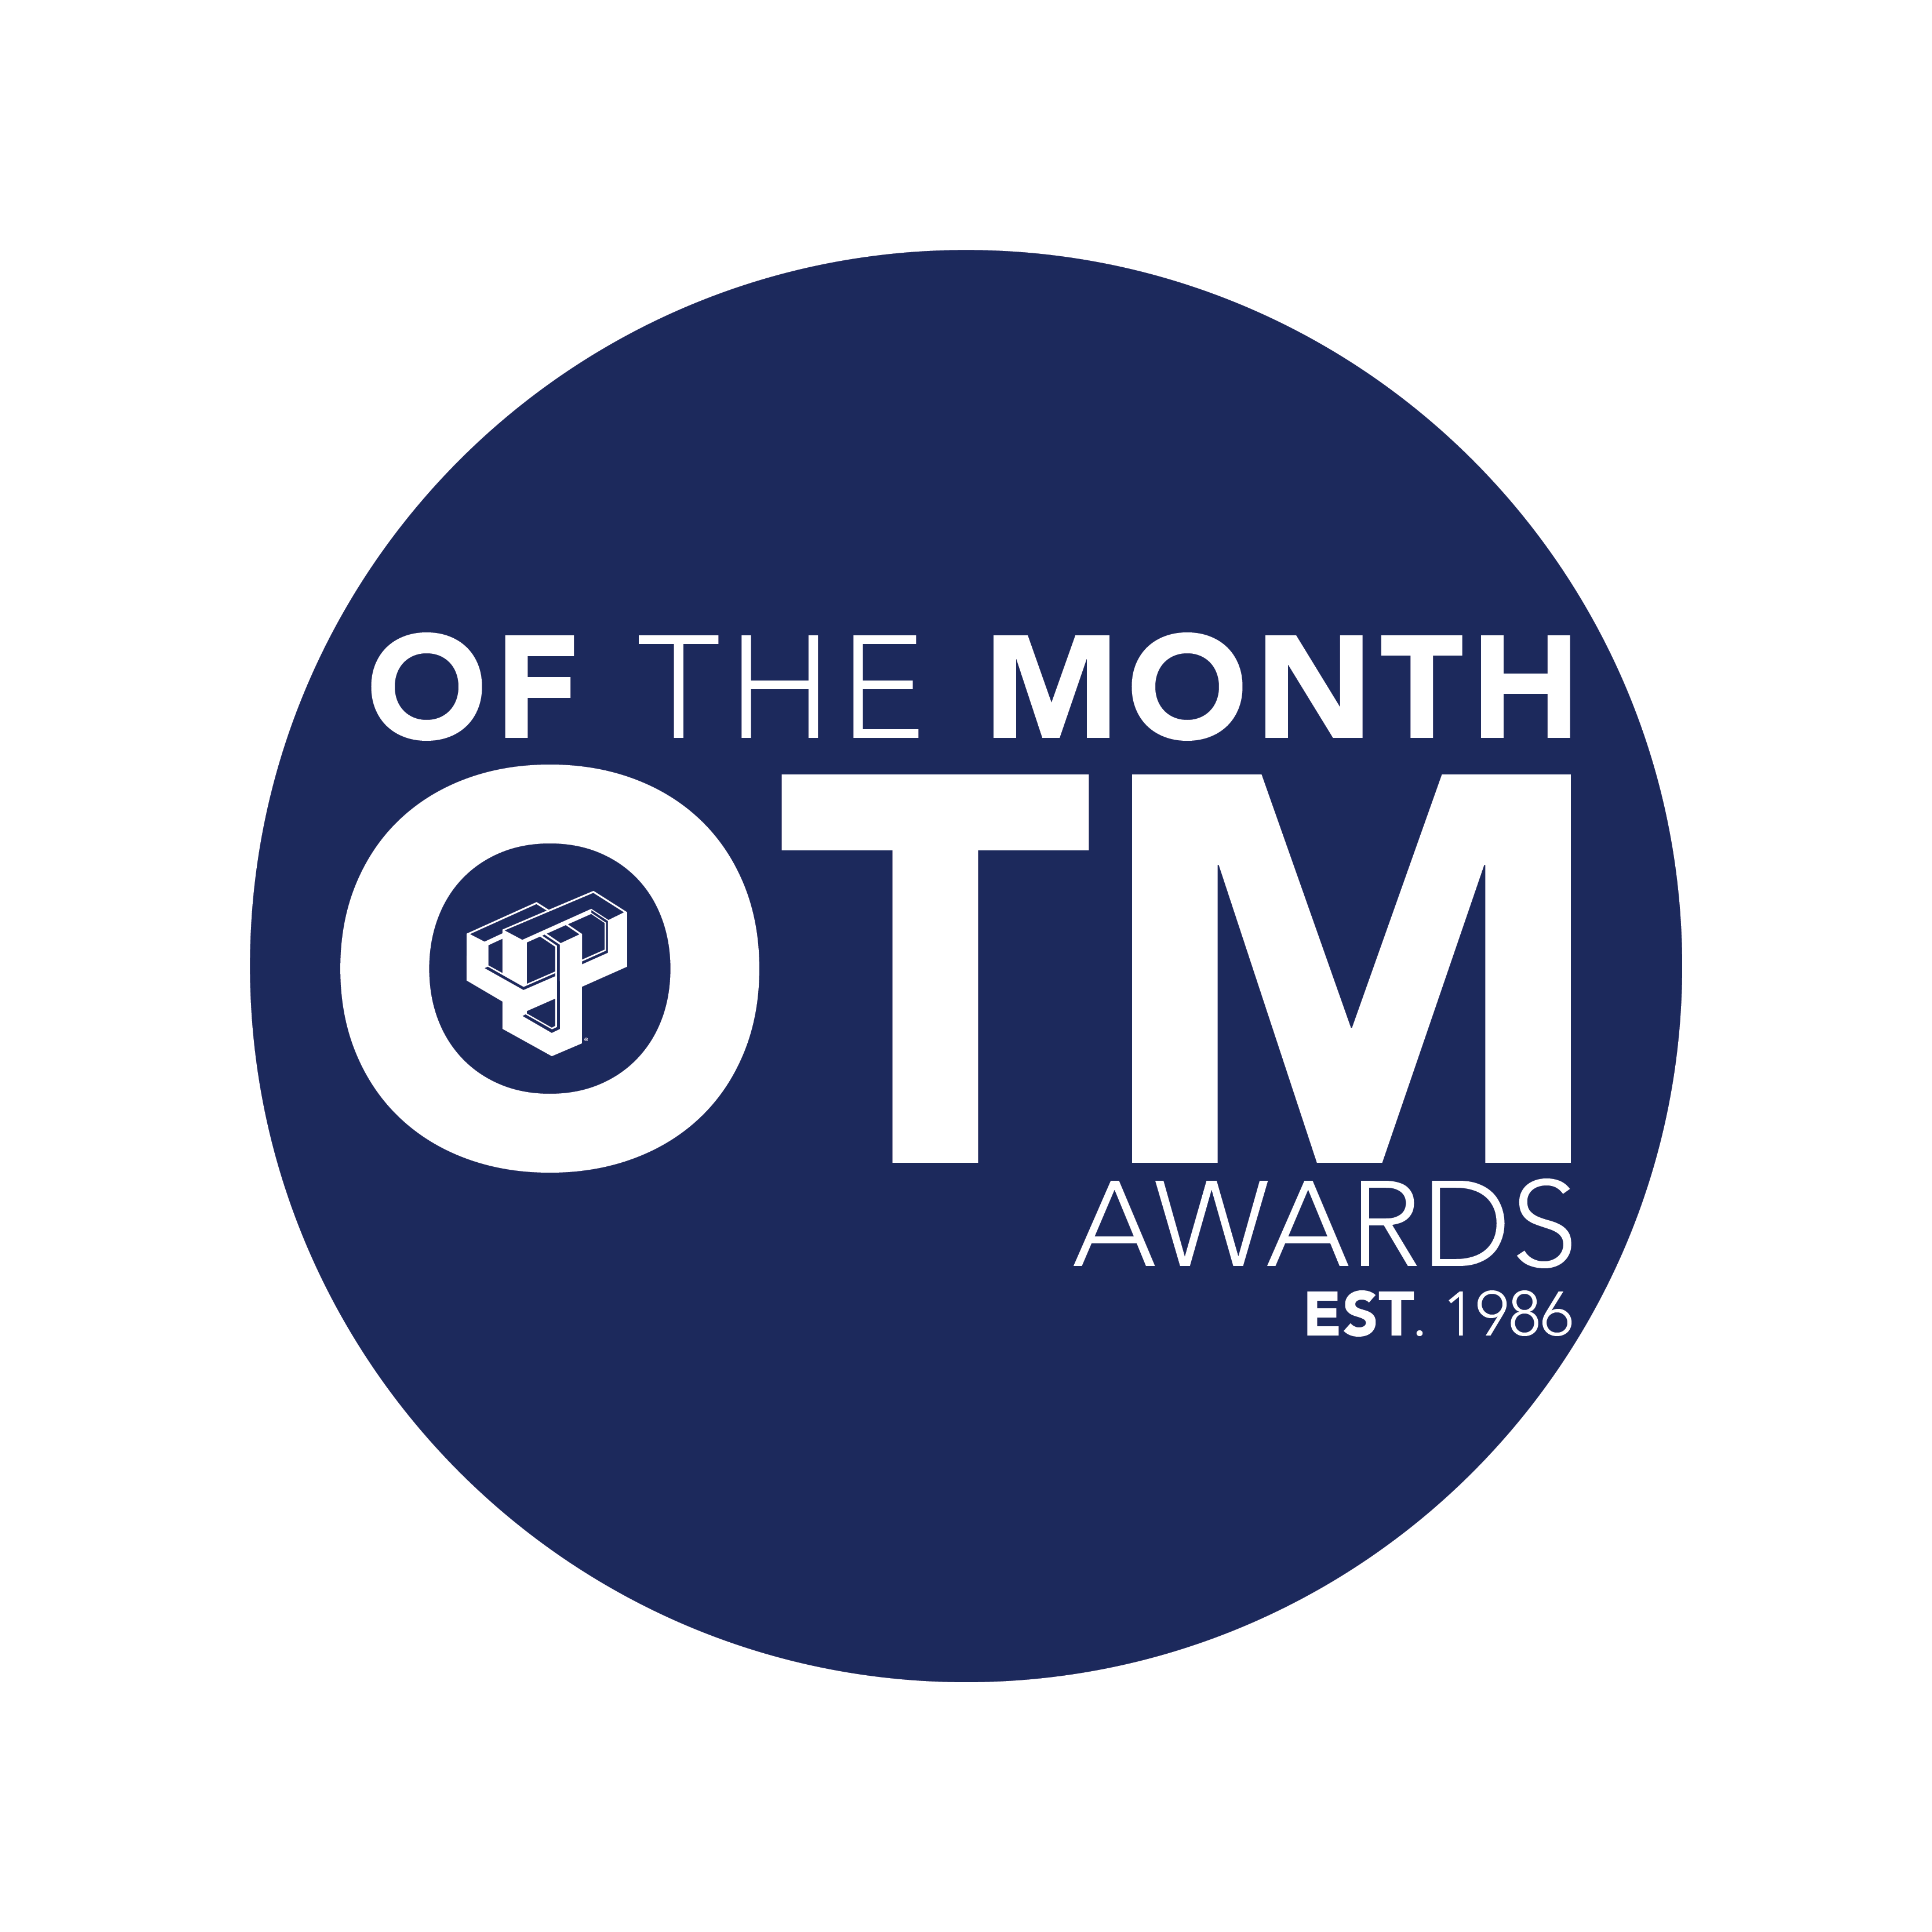 Of the Month circle logo